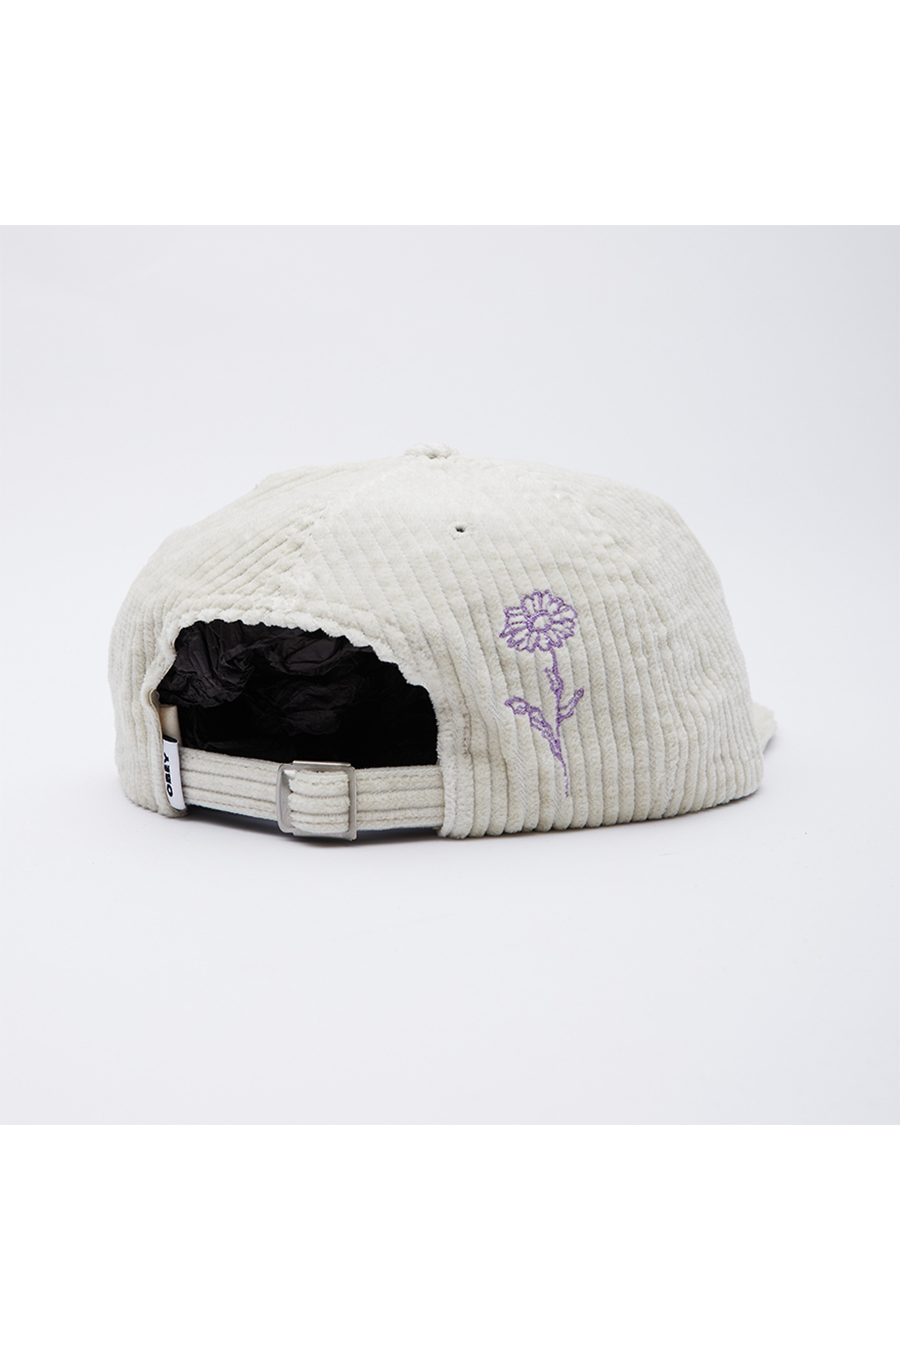 The Cure 6 Panel Strapback | Sago - Main Image Number 3 of 3